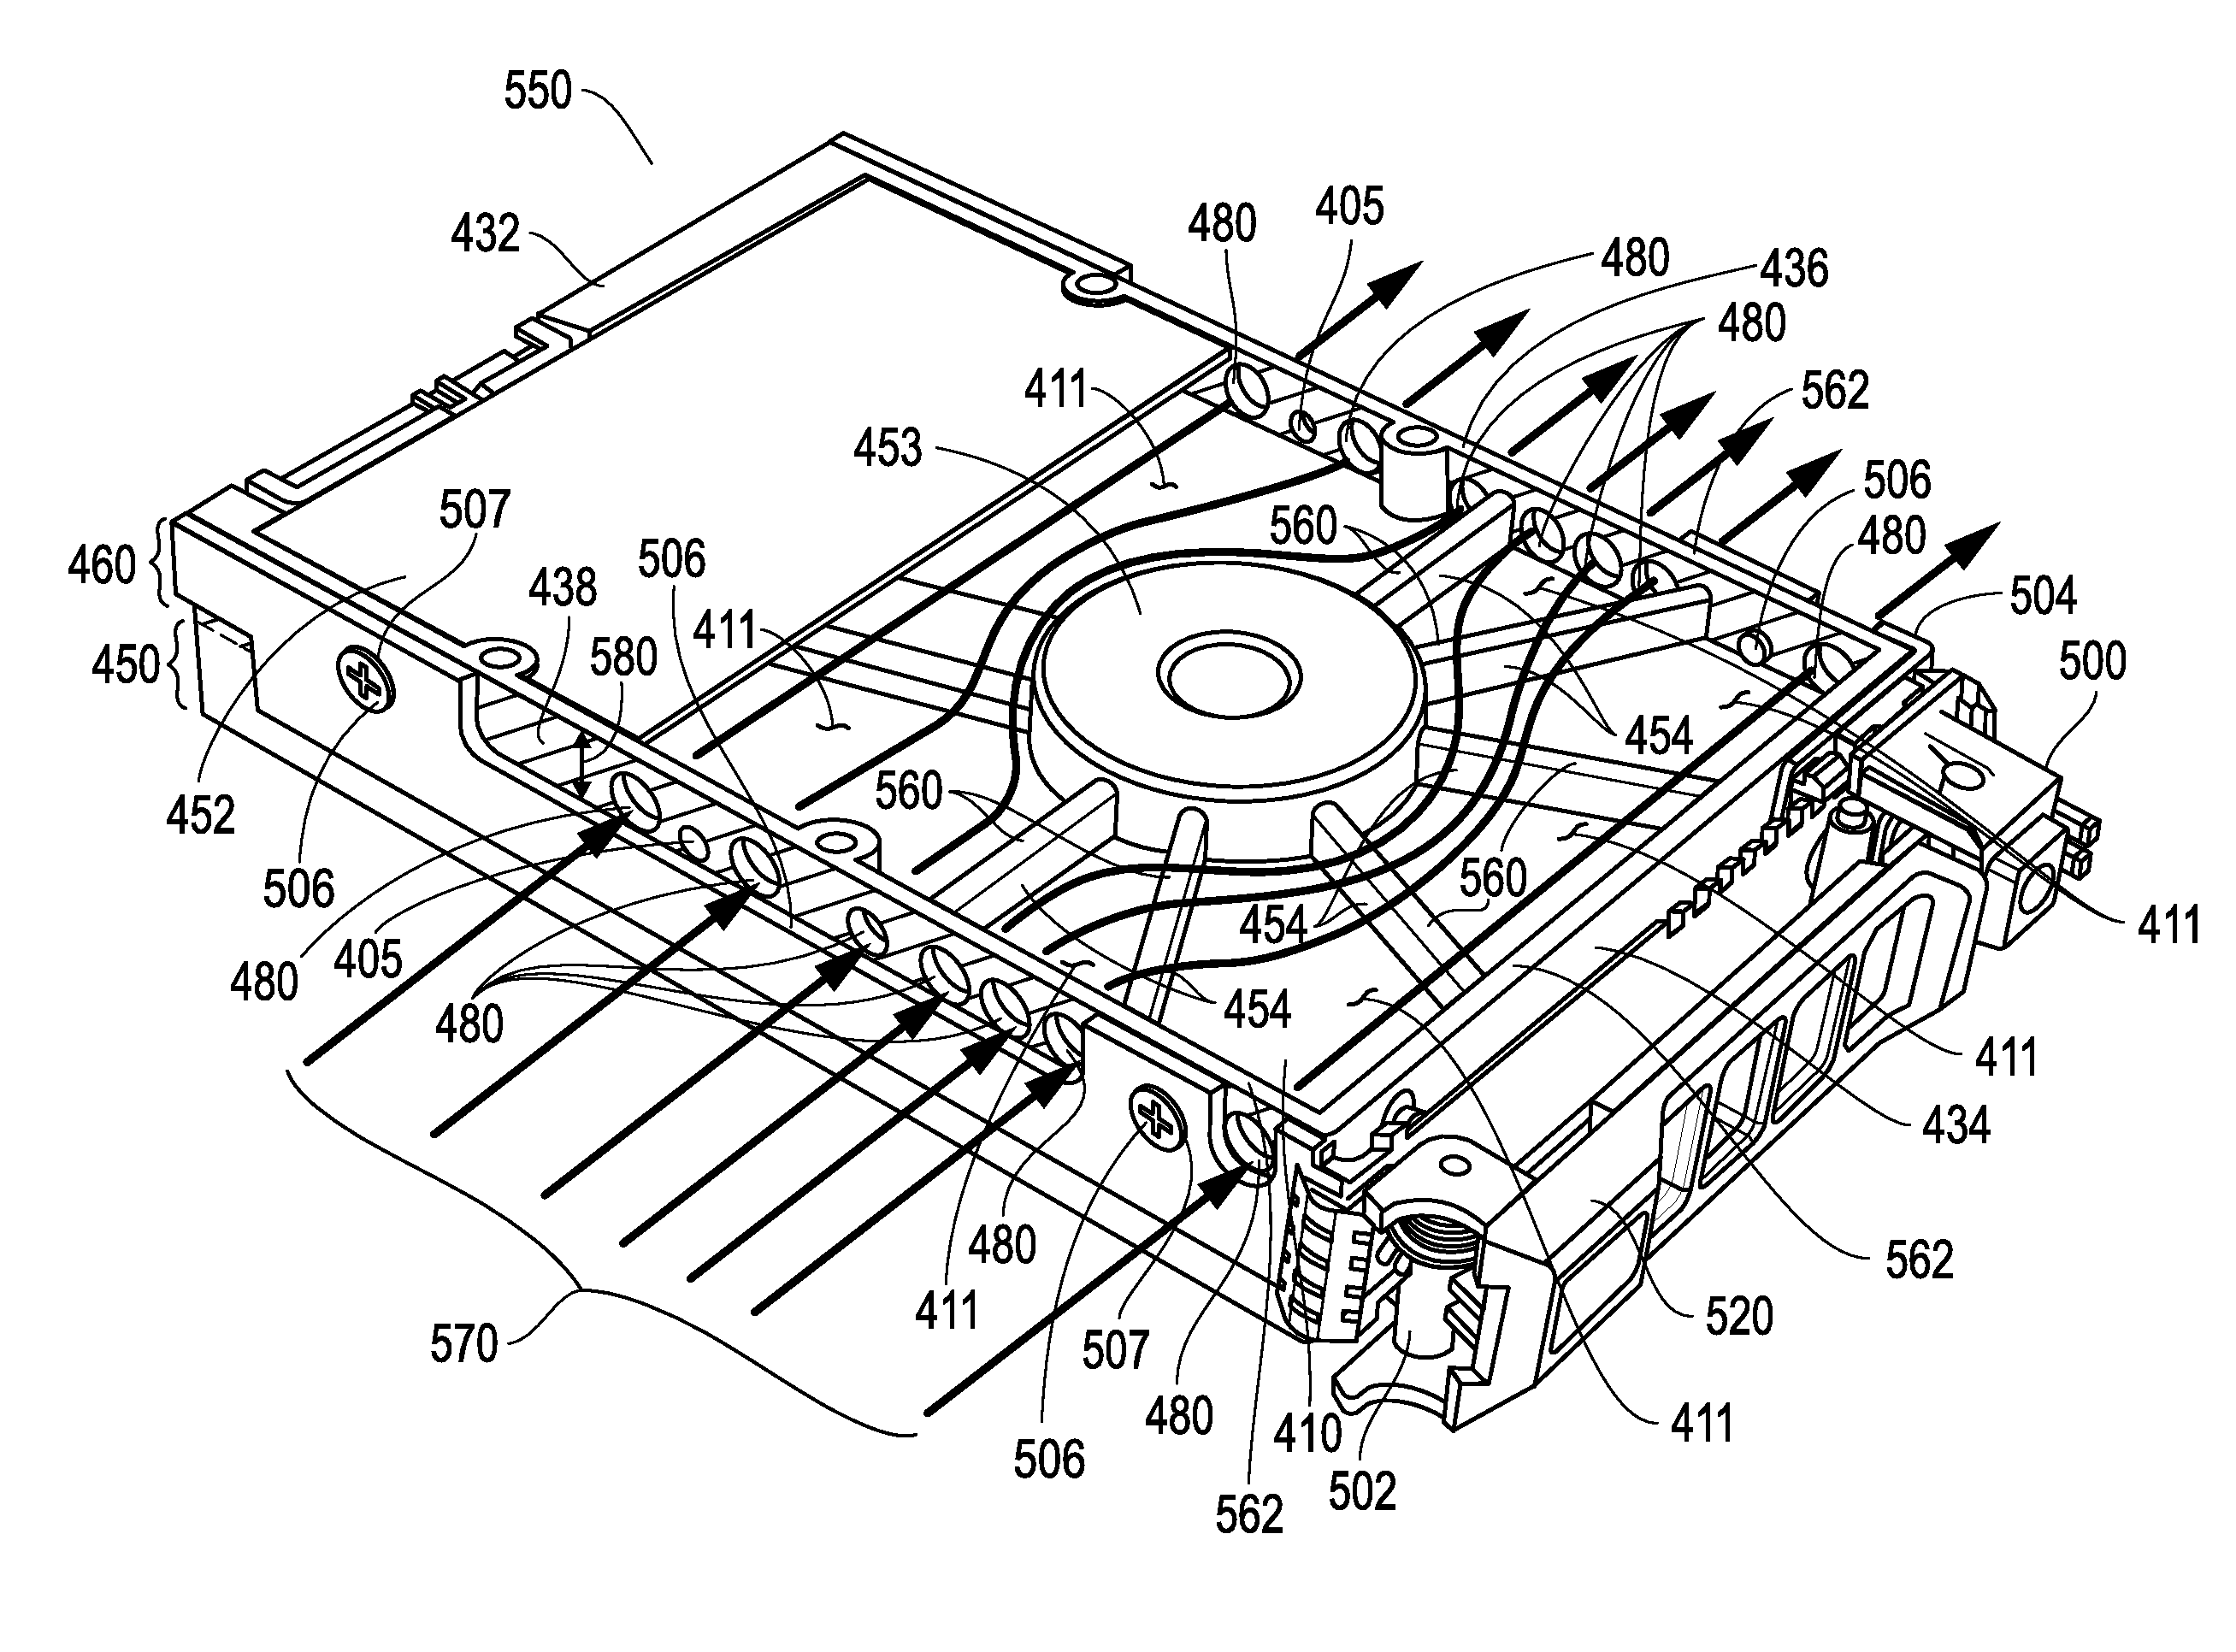 Disk drive carriers and mountable hard drive systems with improved air flow